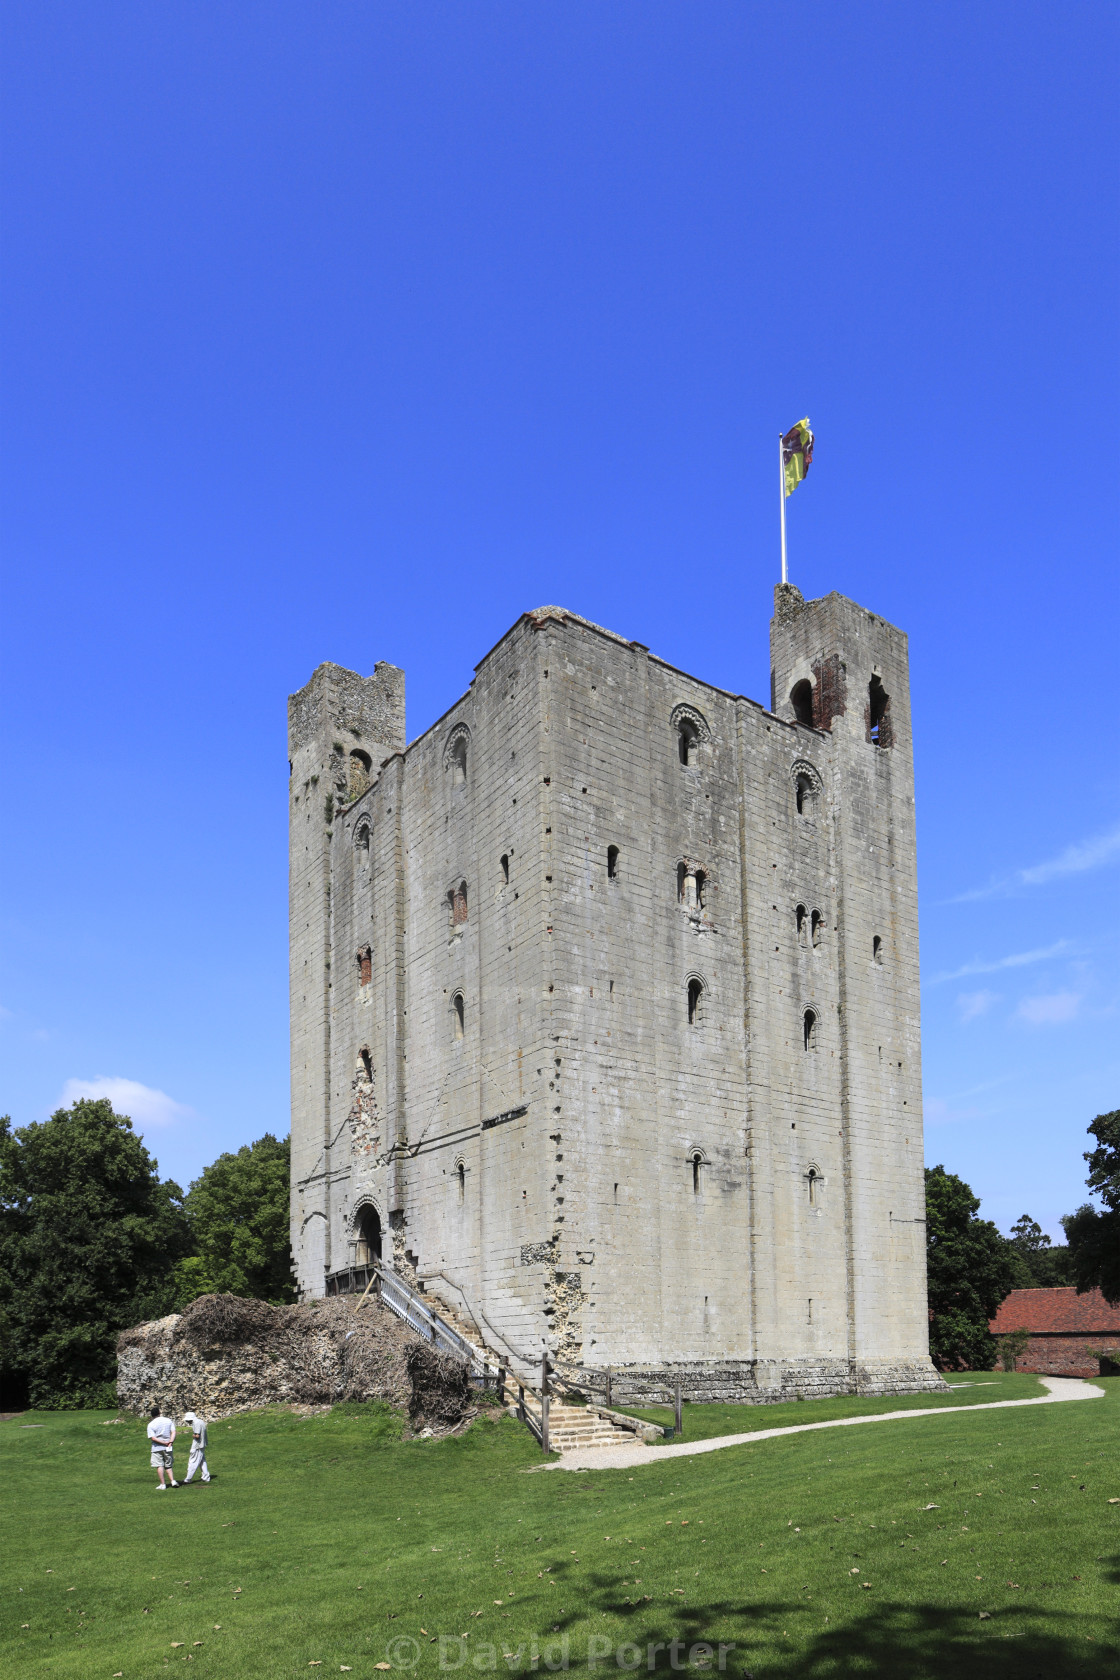 Hedingham Castle In The Village Of Castle Hedingham Essex County England Uk License Download Or Print For 20 00 Photos Picfair - hedingham castle roblox